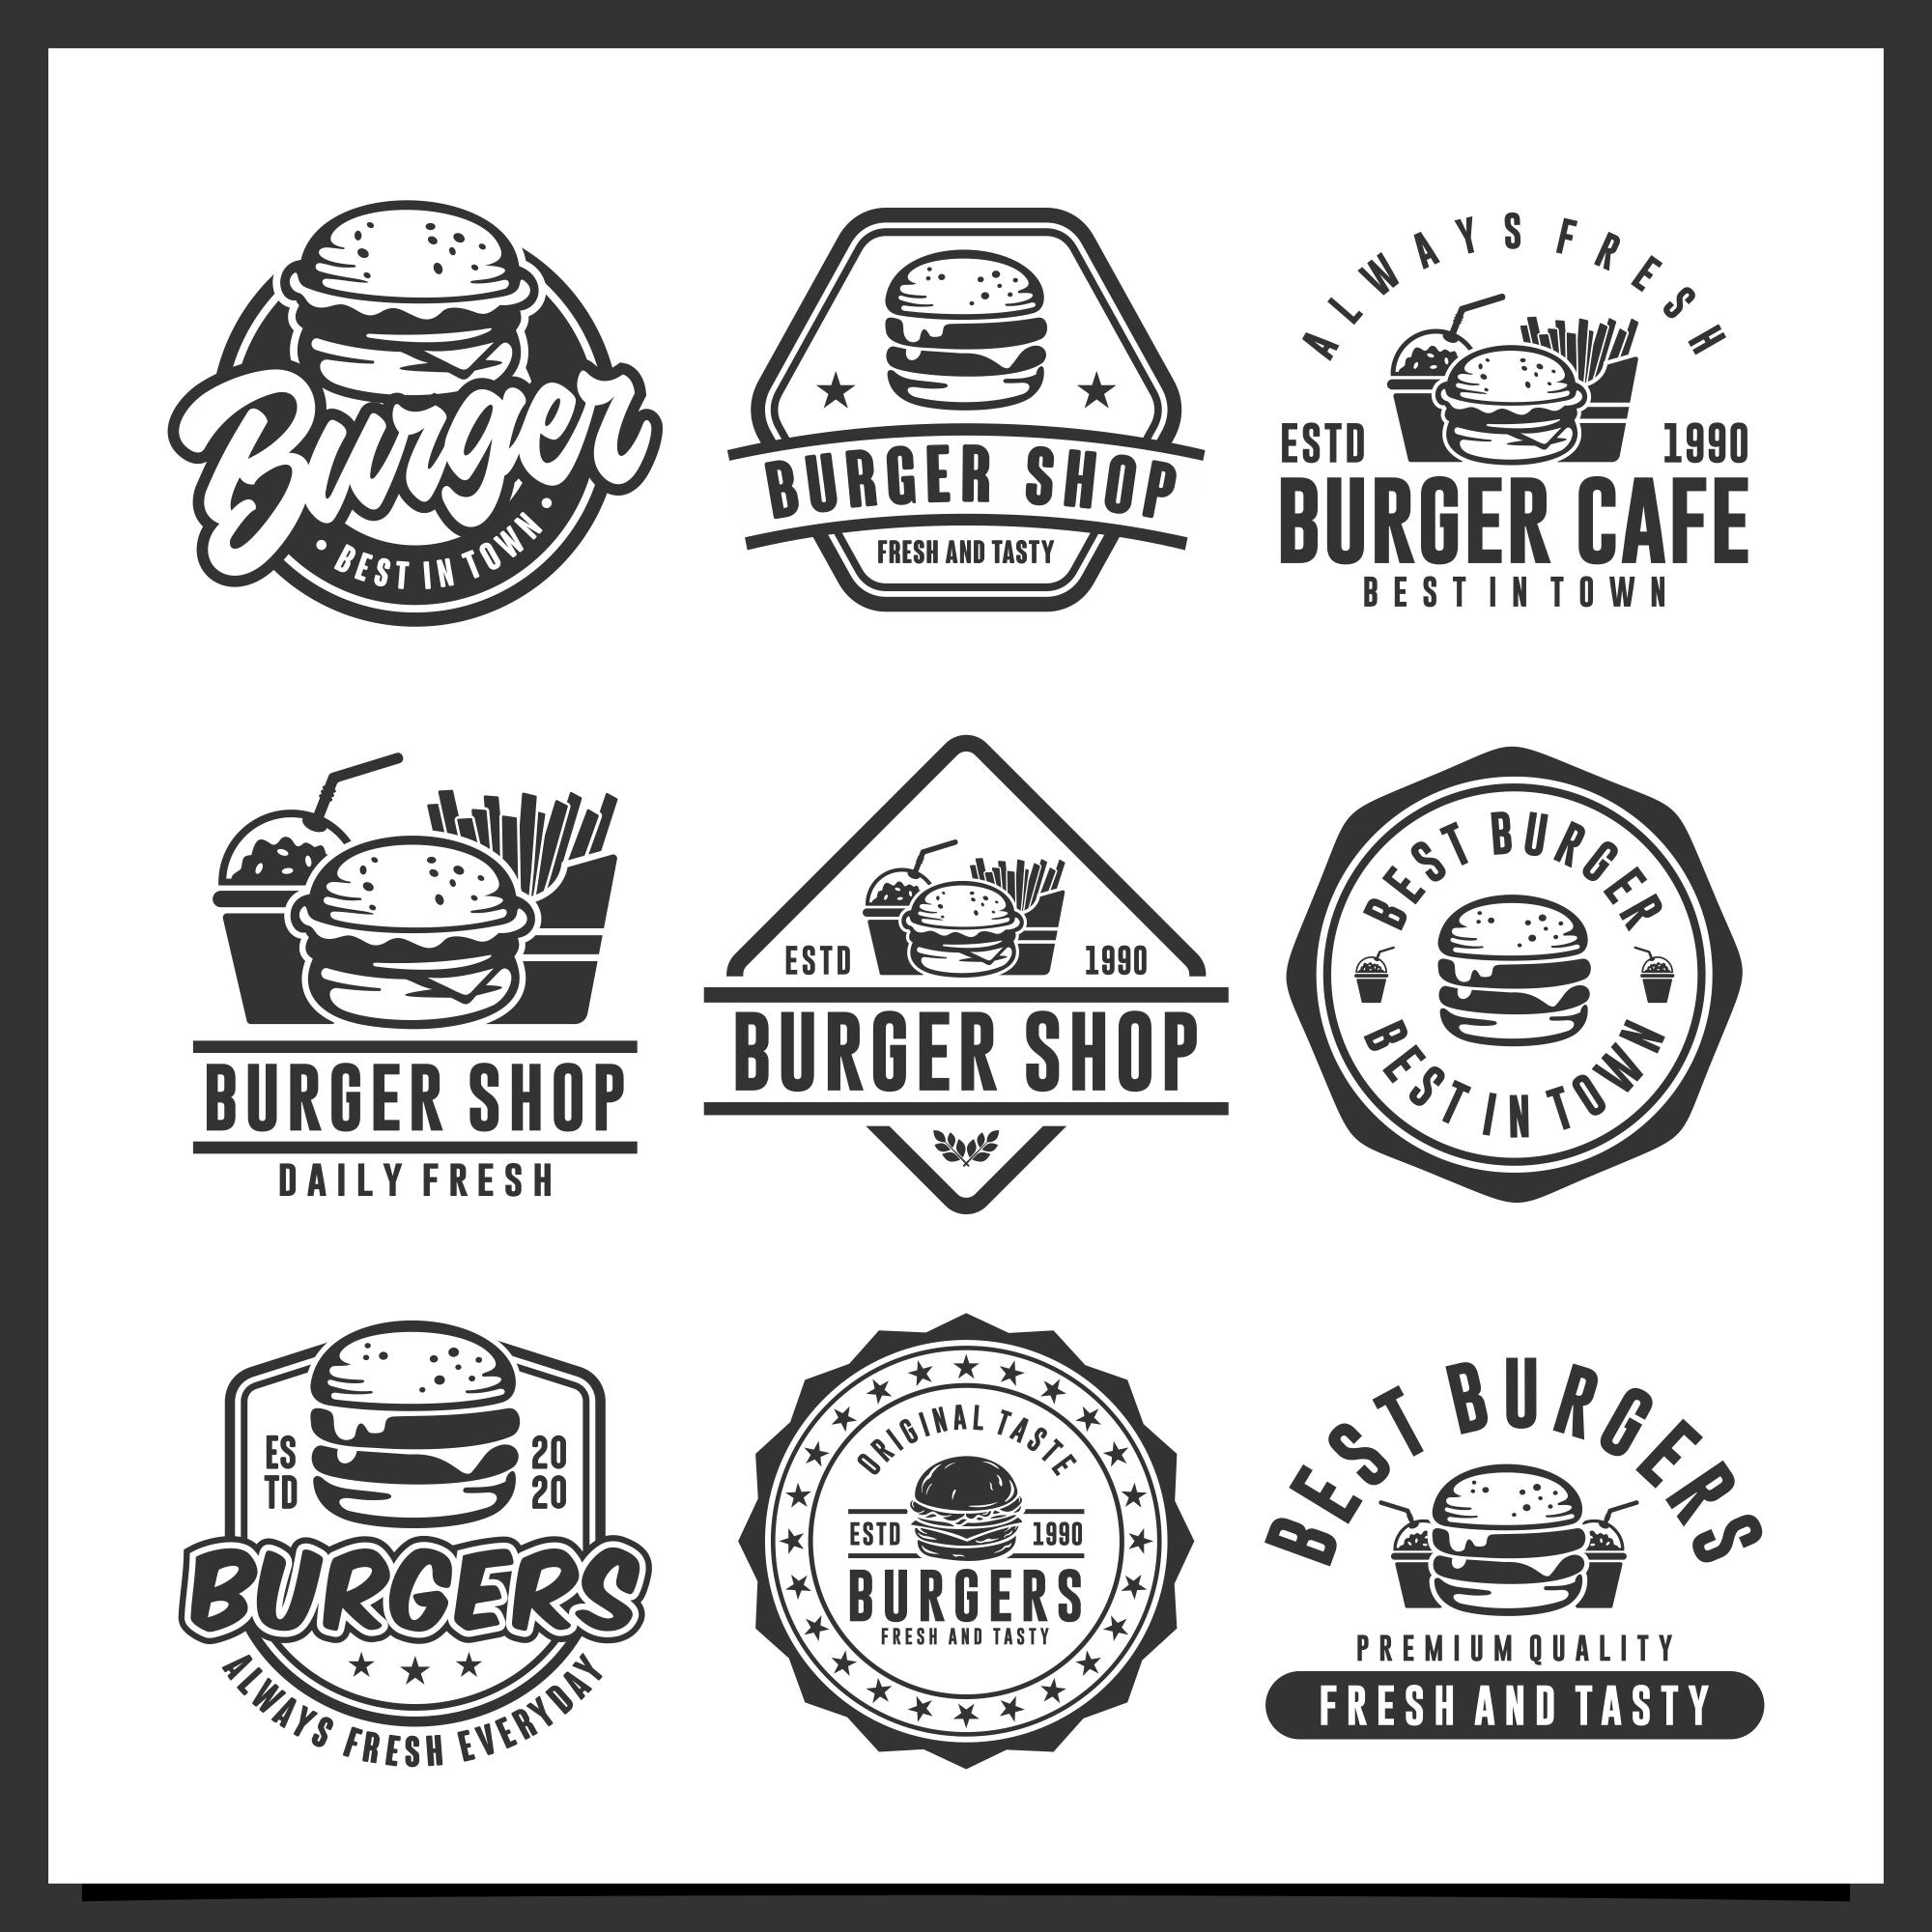 36 Burgers logo badge design collection preview image.